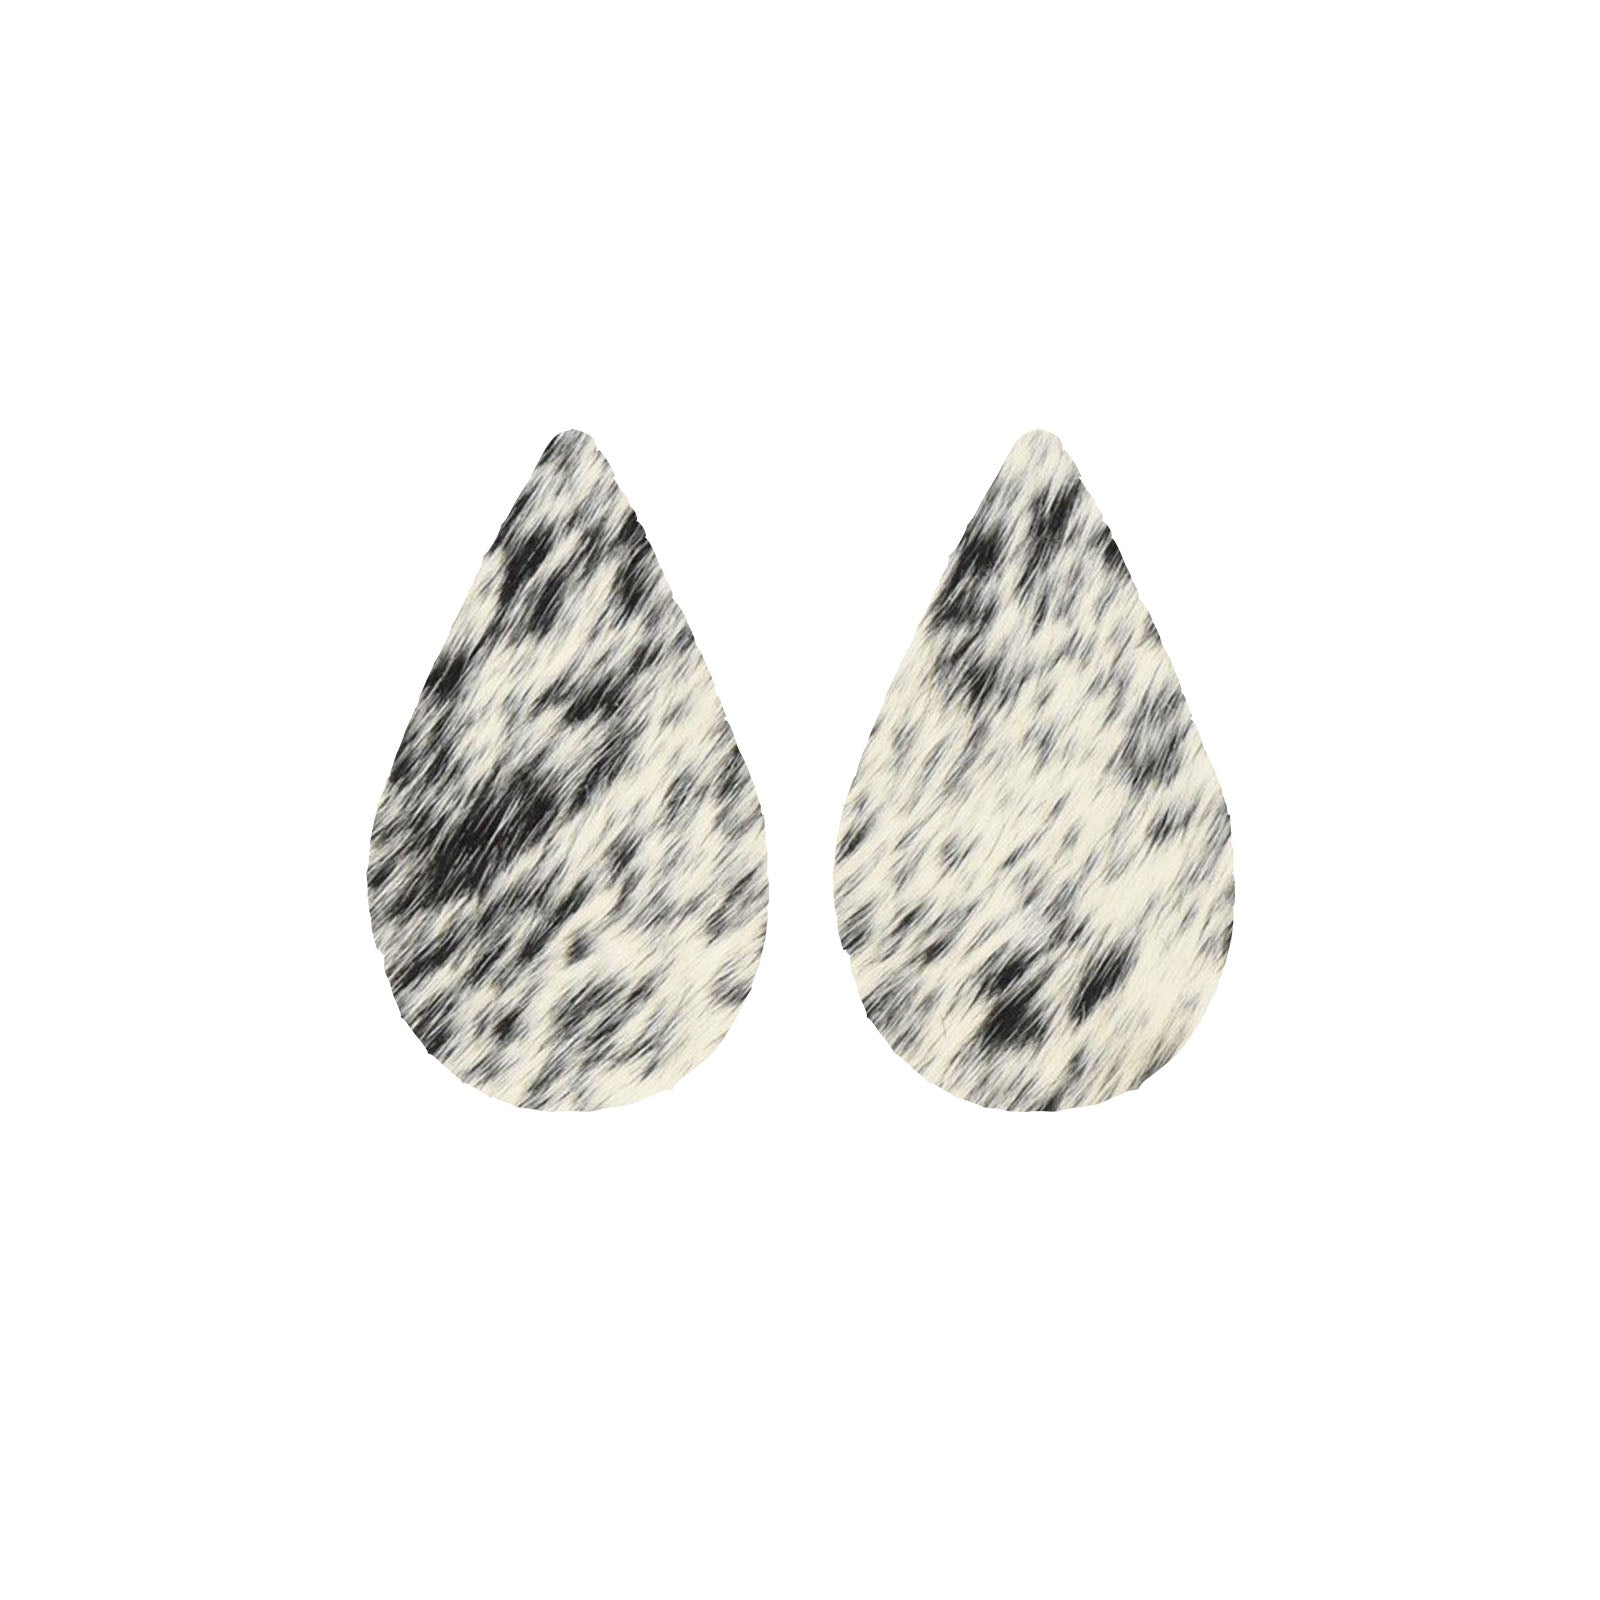 Spotted Light Black and Off White Hair On Die Cut Earrings, Large Teardrop | The Leather Guy